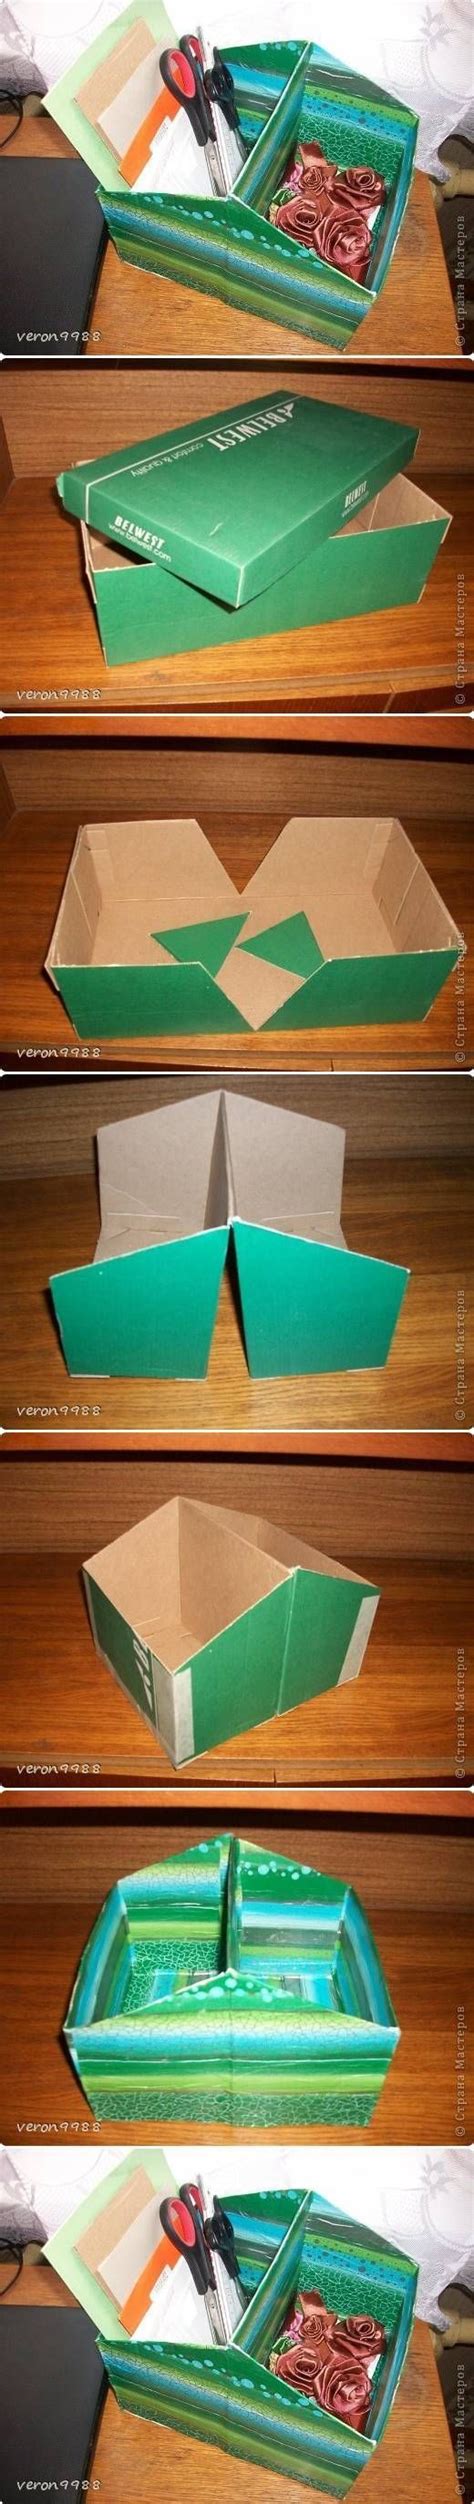 DIY Shoe Box Organizer Pictures, Photos, and Images for Facebook, Tumblr, Pinterest, and Twitter